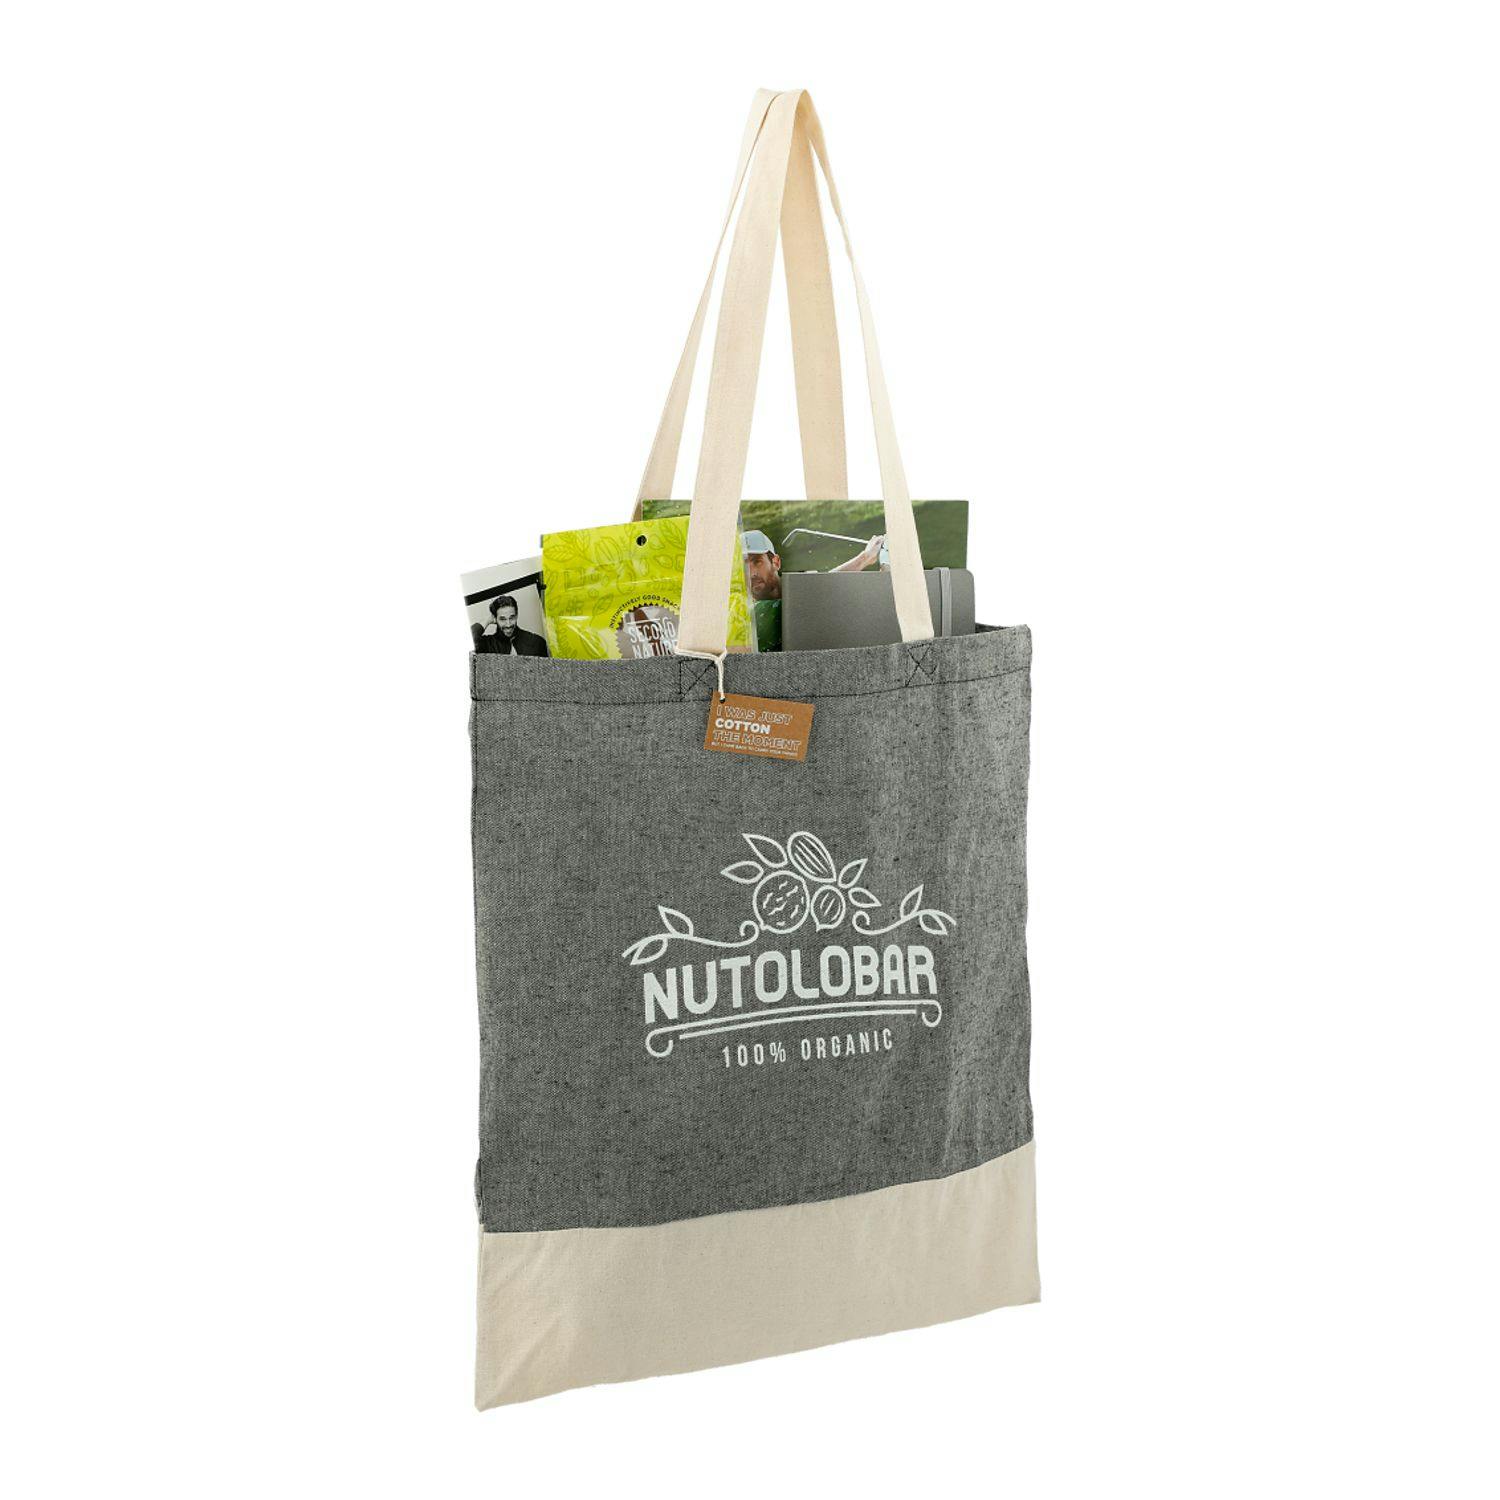 Split Recycled 5oz Cotton Twill Convention Tote - additional Image 4